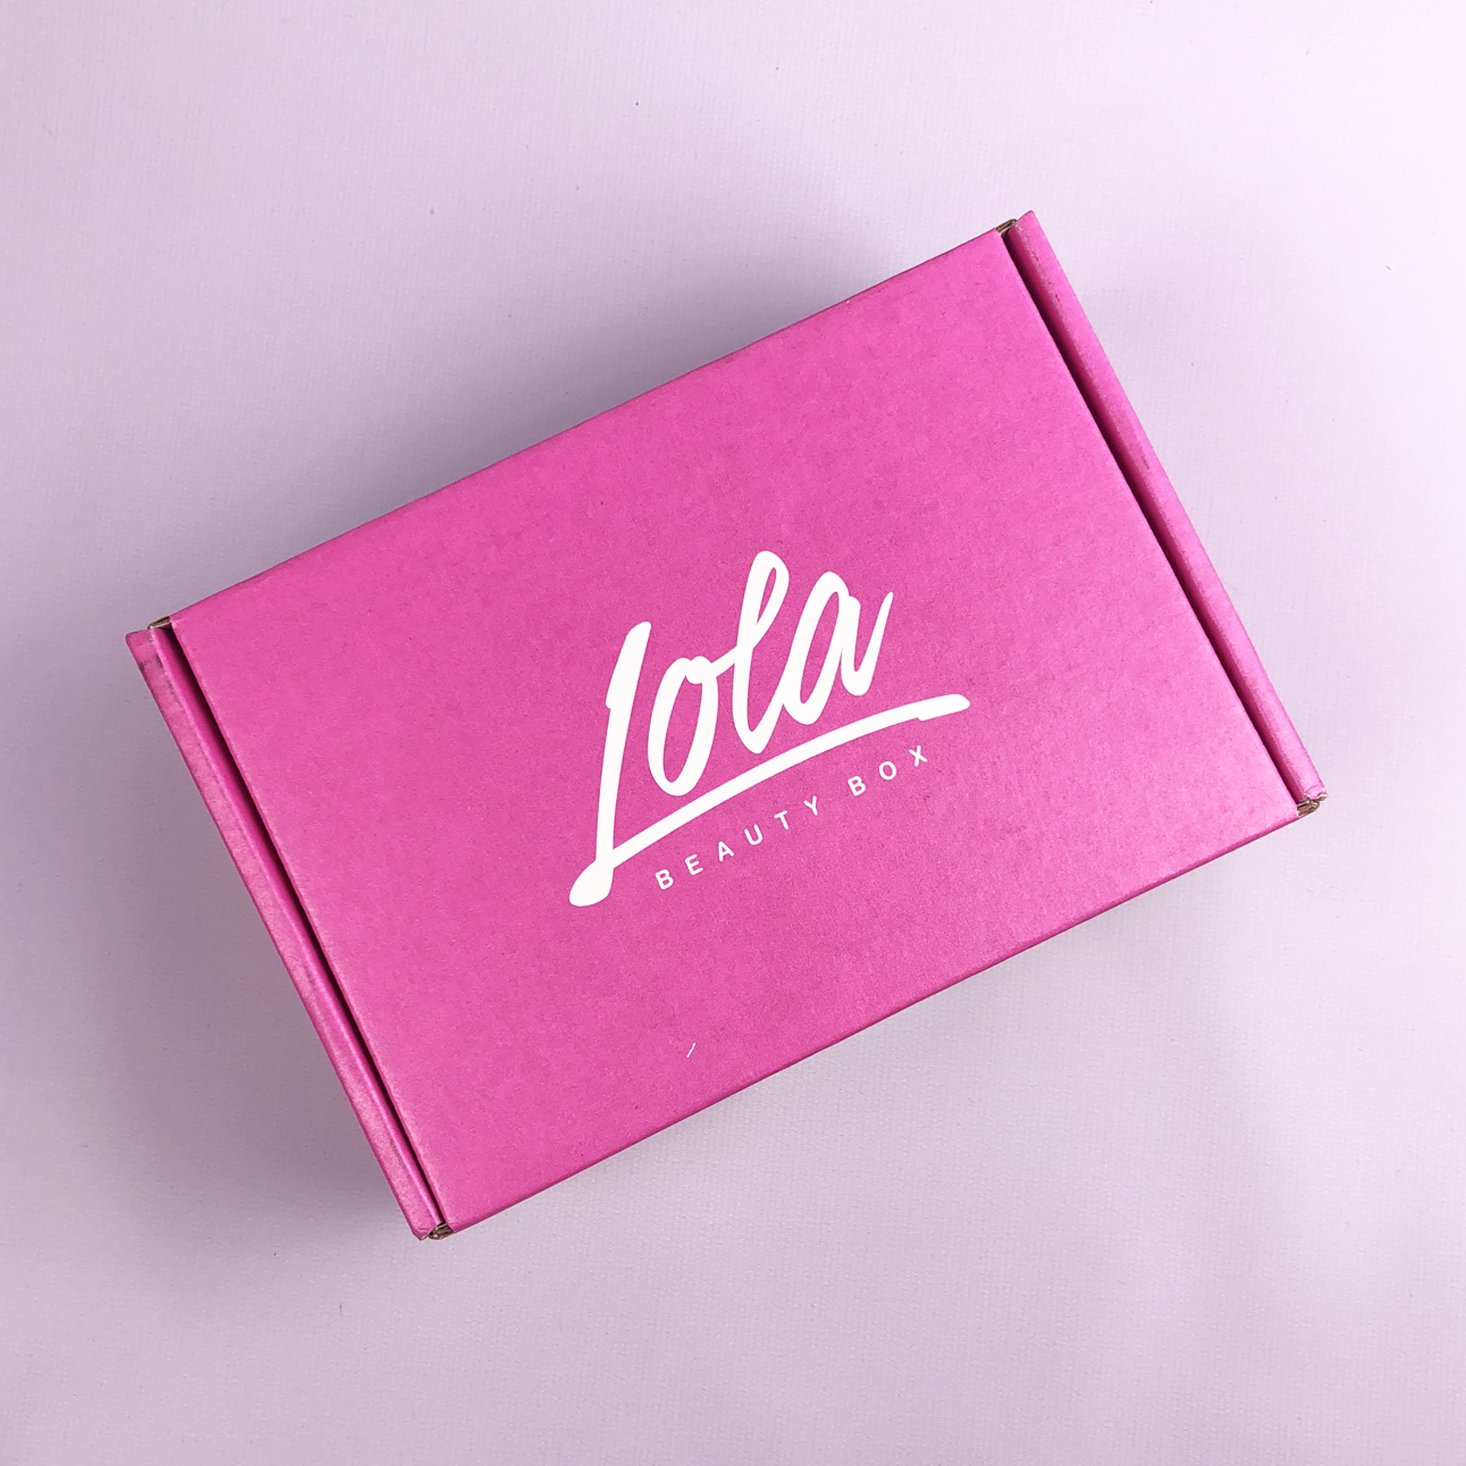 Lola Beauty Box Subscription Review – August 2018